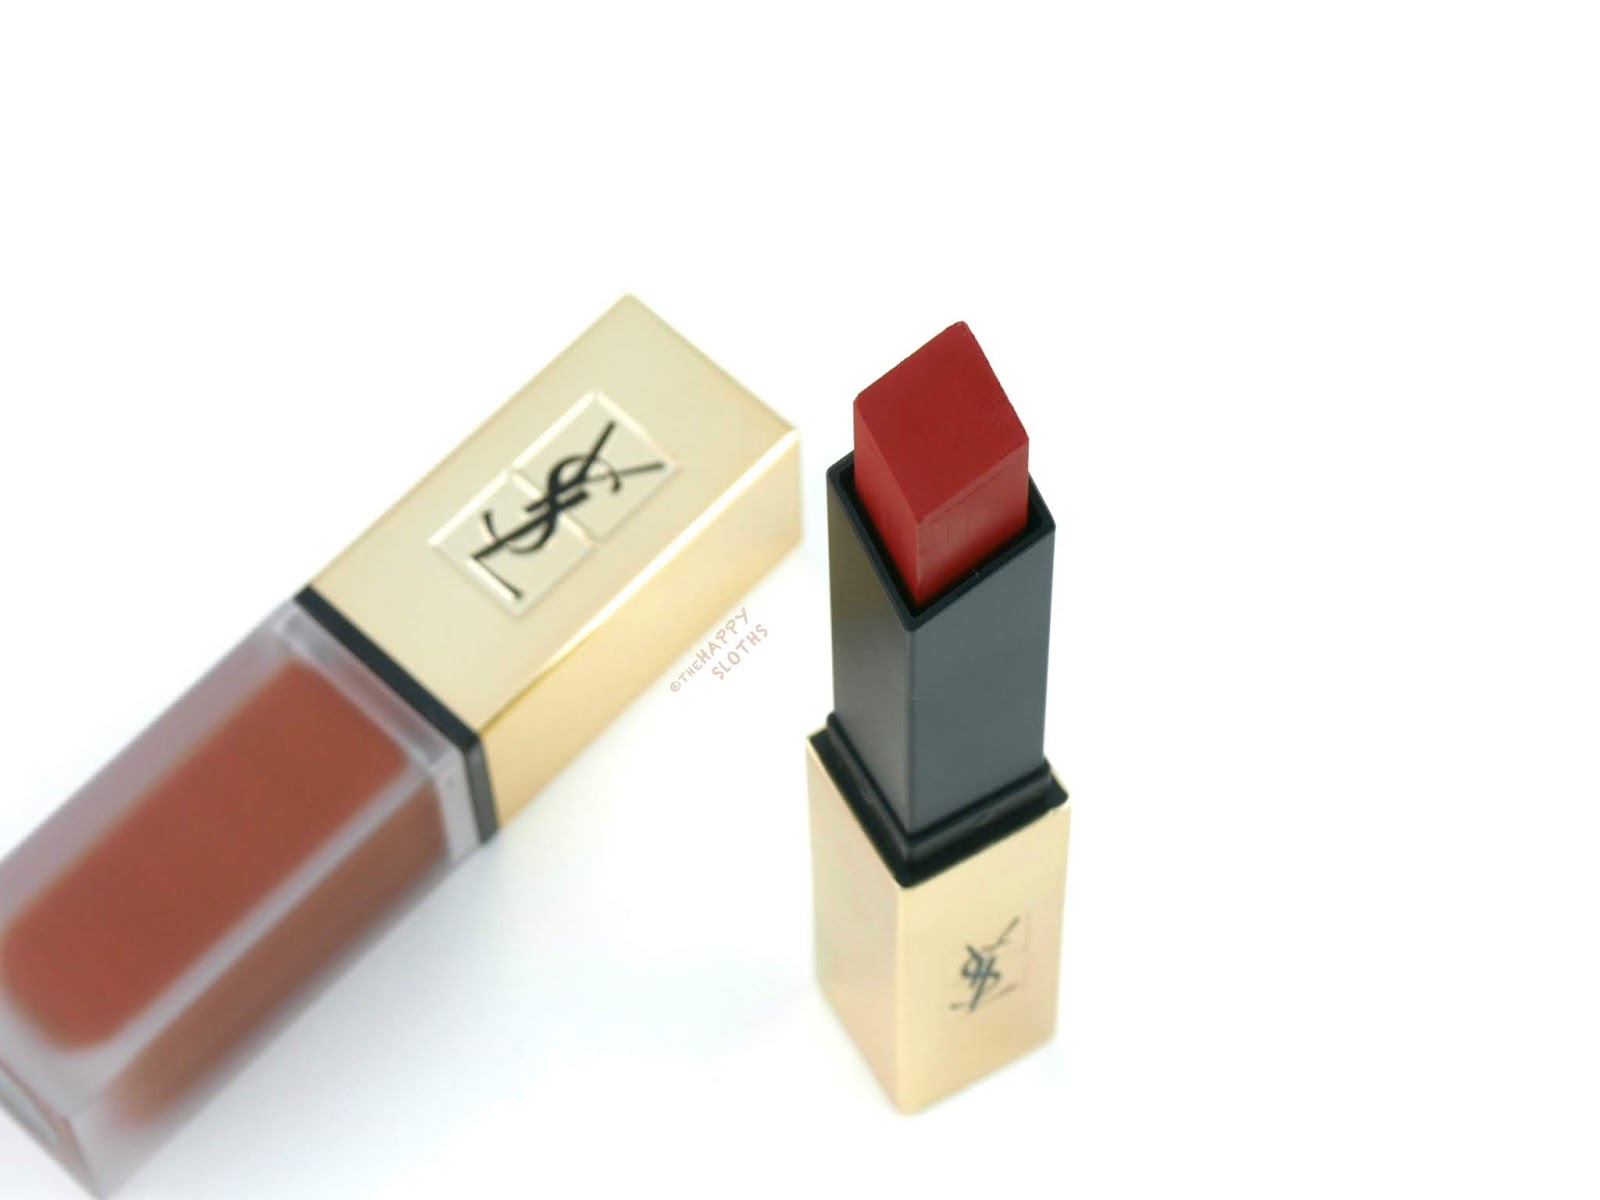 Yves Saint Laurent | Rouge Pur Couture The Slim Matte Lipstick in "21 Rouge Paradoxe": Review and Swatches